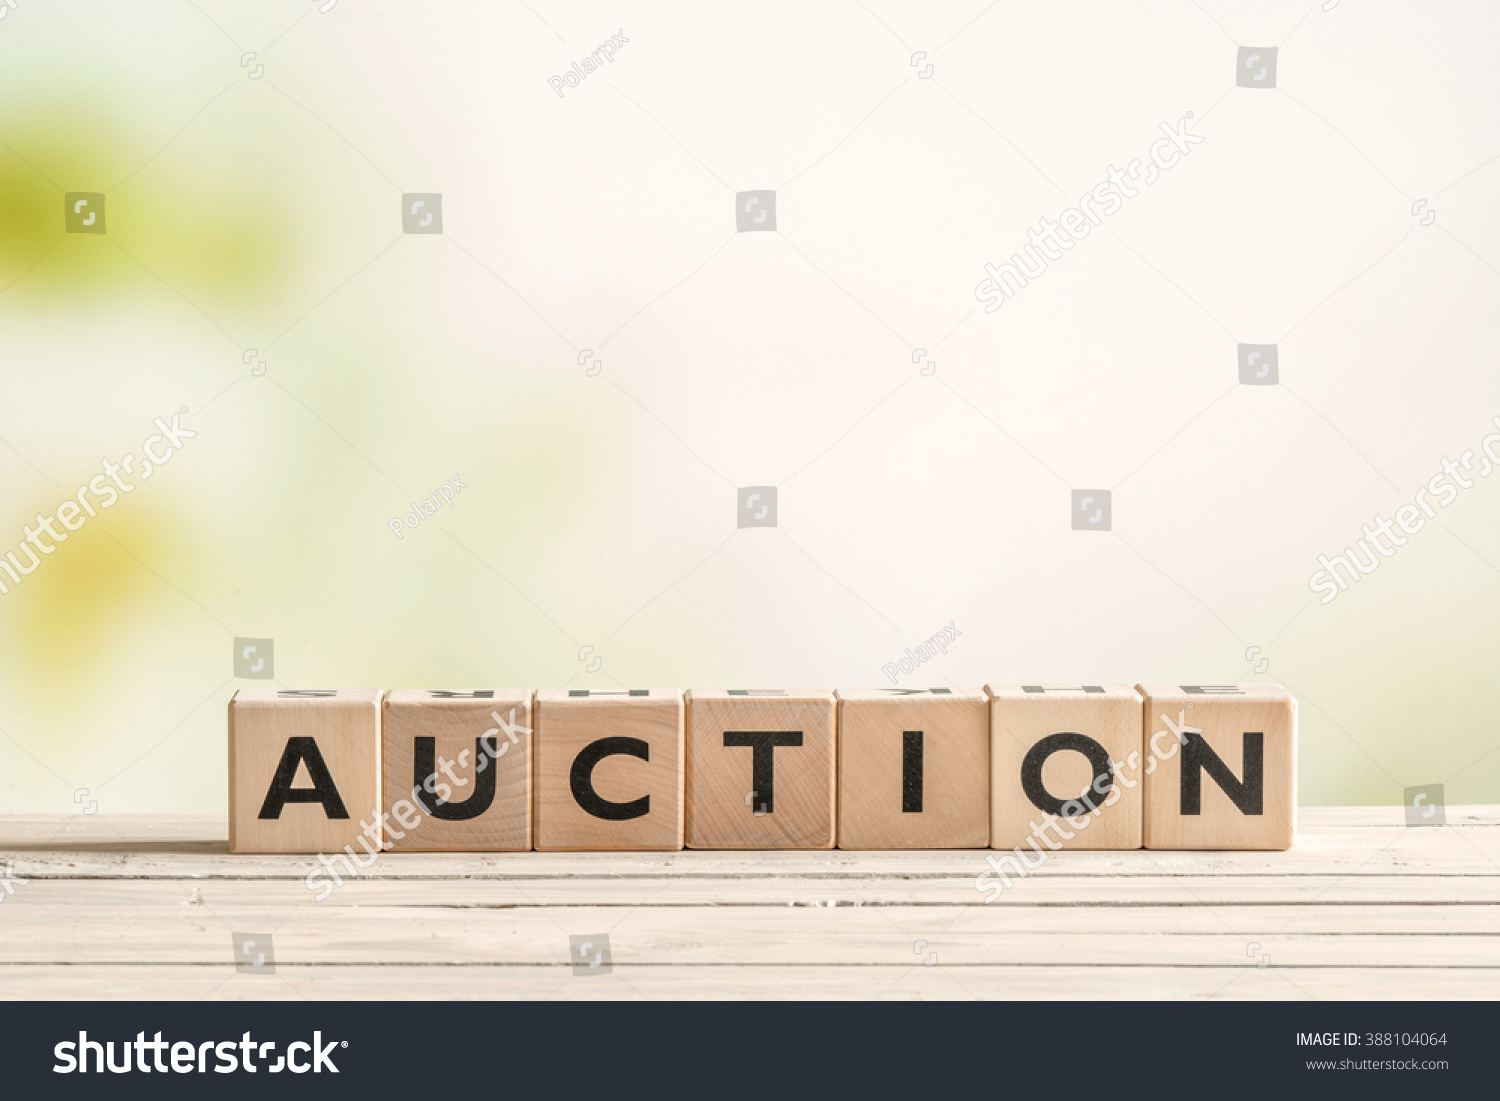 Auction sign on a vintage table on green background #388104064